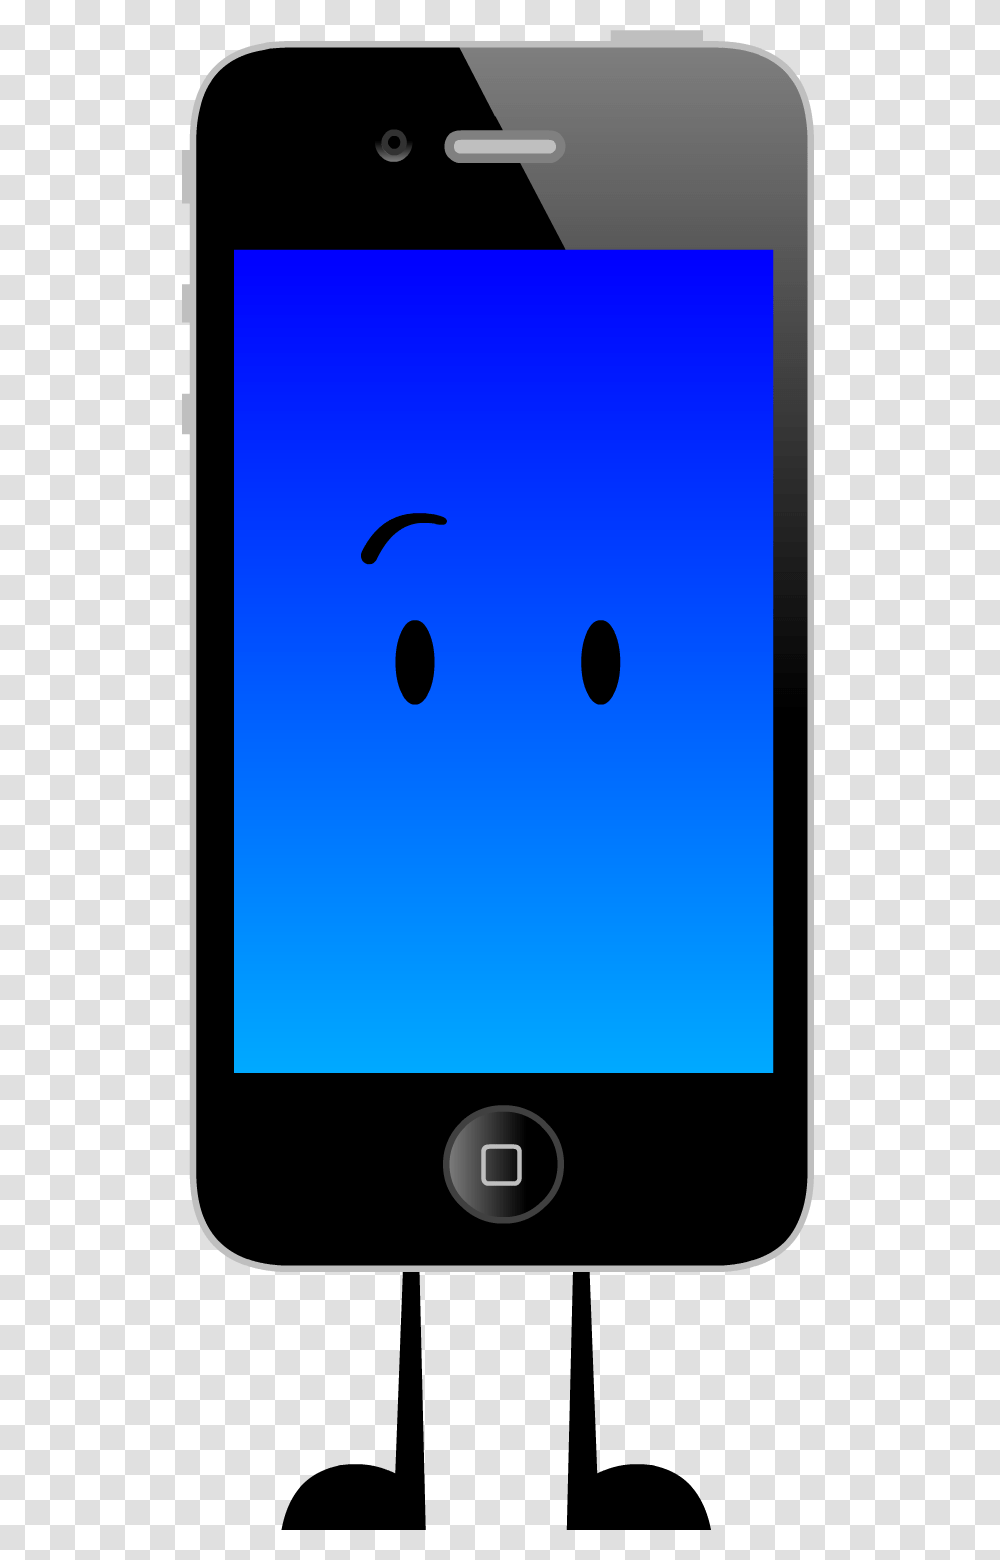 Object Oppose Wiki Flat Object, Phone, Electronics, Mobile Phone, Cell Phone Transparent Png